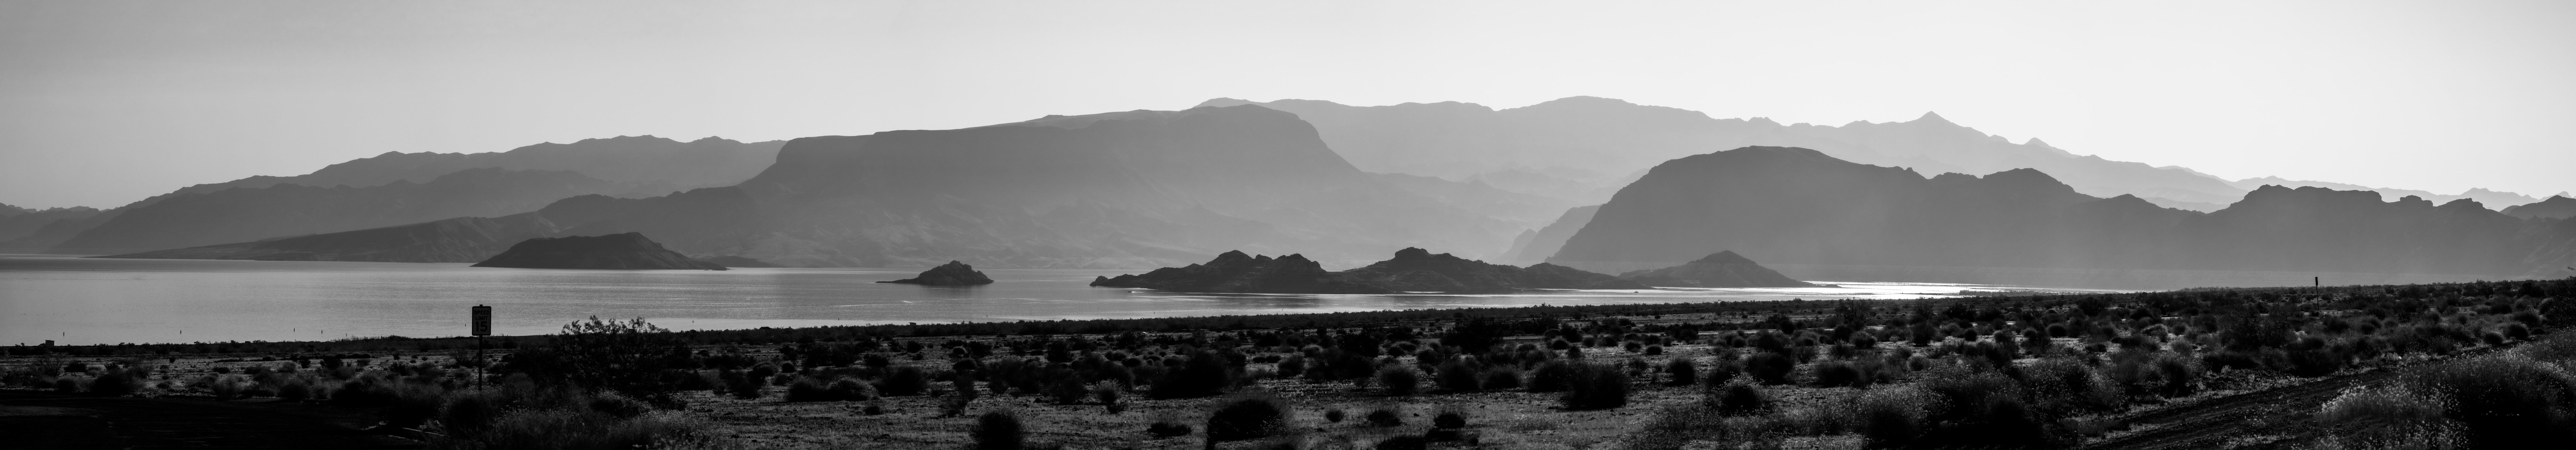 monochrome panorama of hazy mountains with lake and desert in foreground